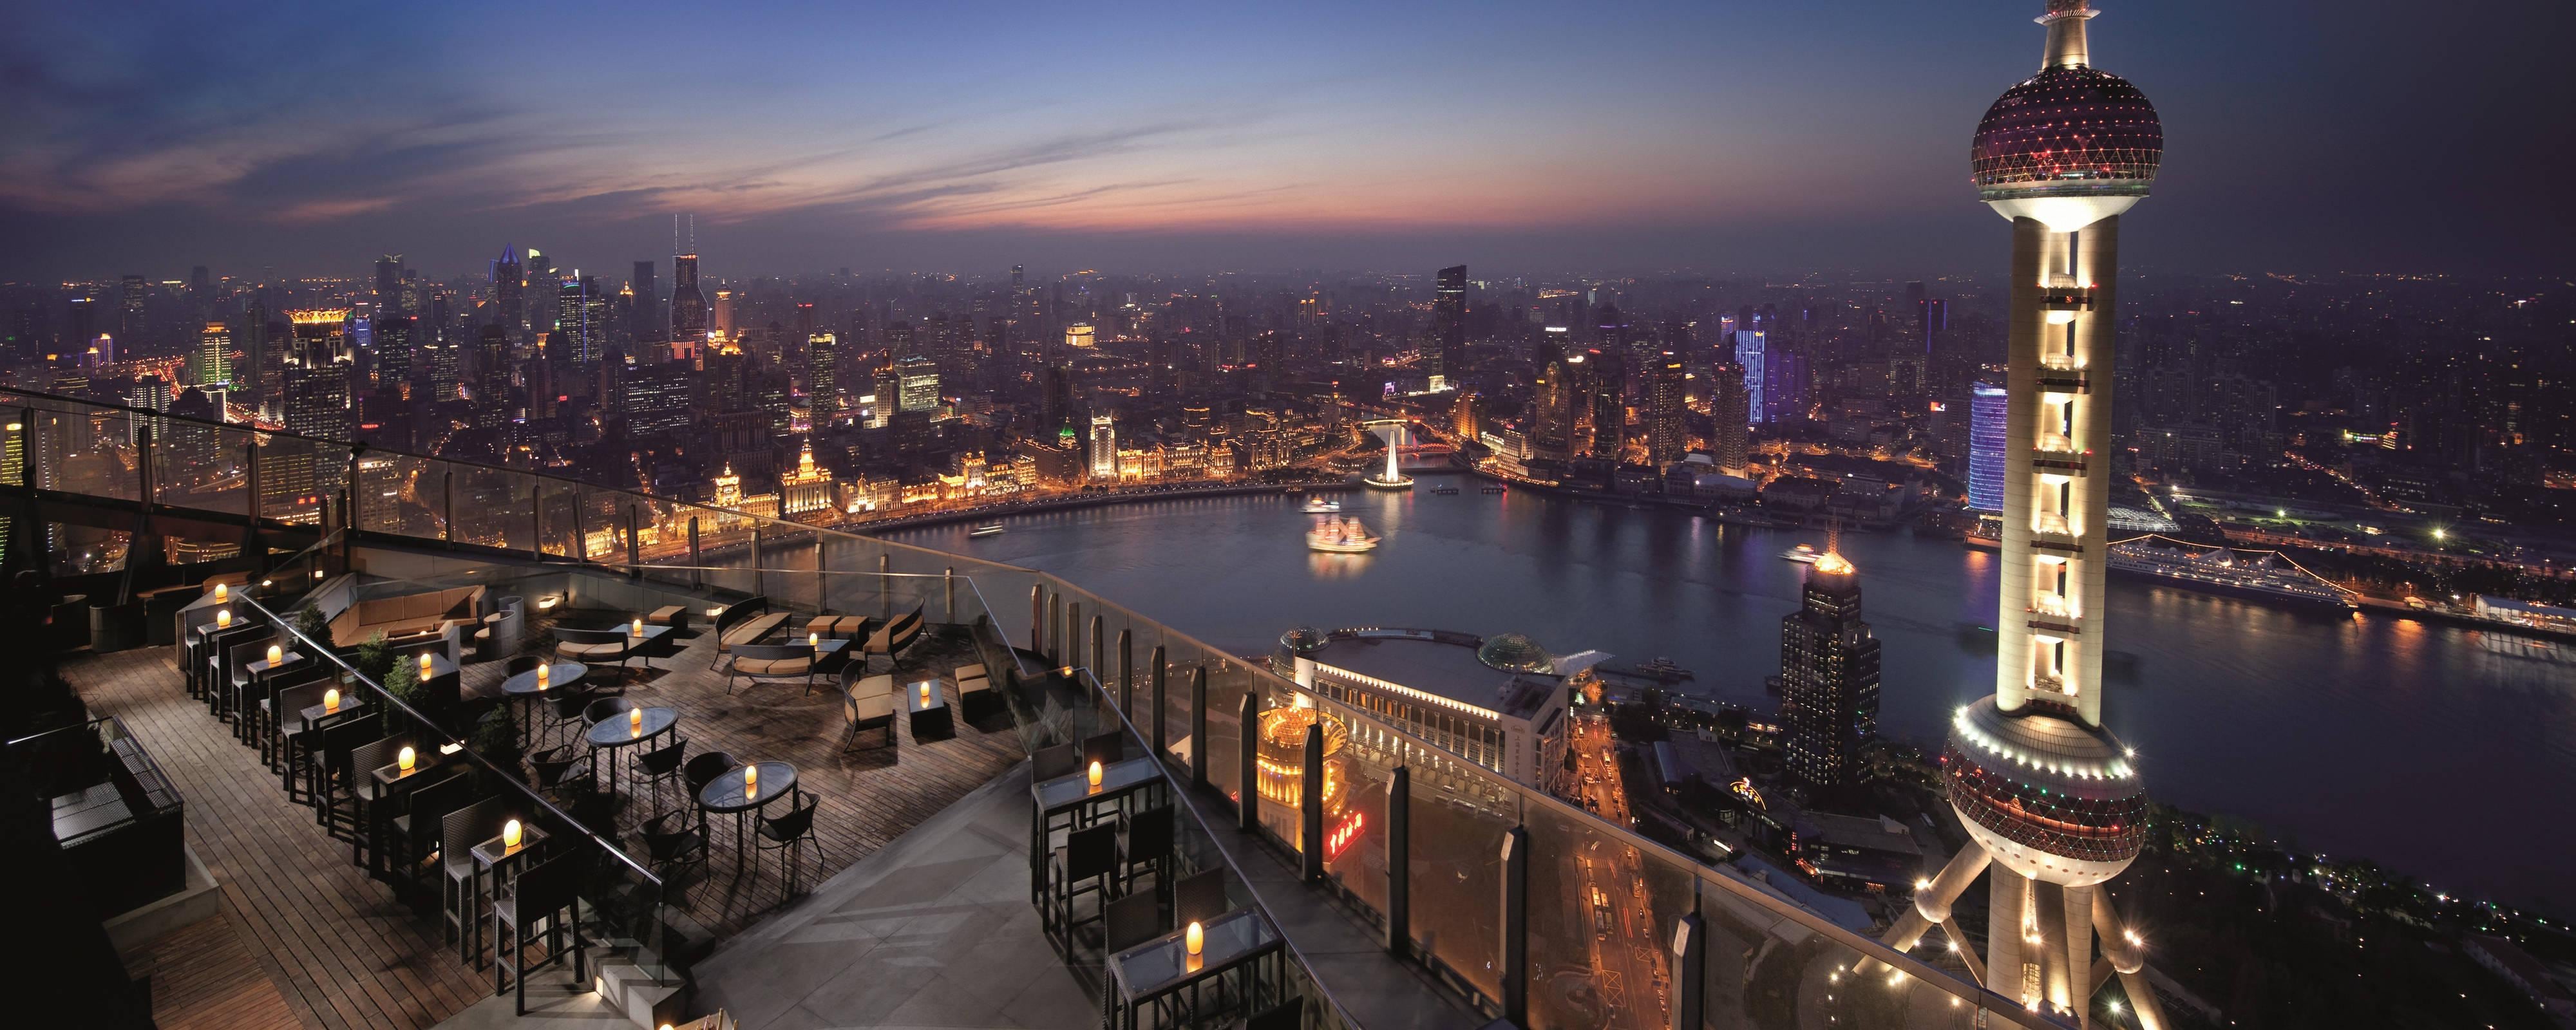 Image for The Ritz-Carlton Shanghai, Pudong, a Marriott hotel.